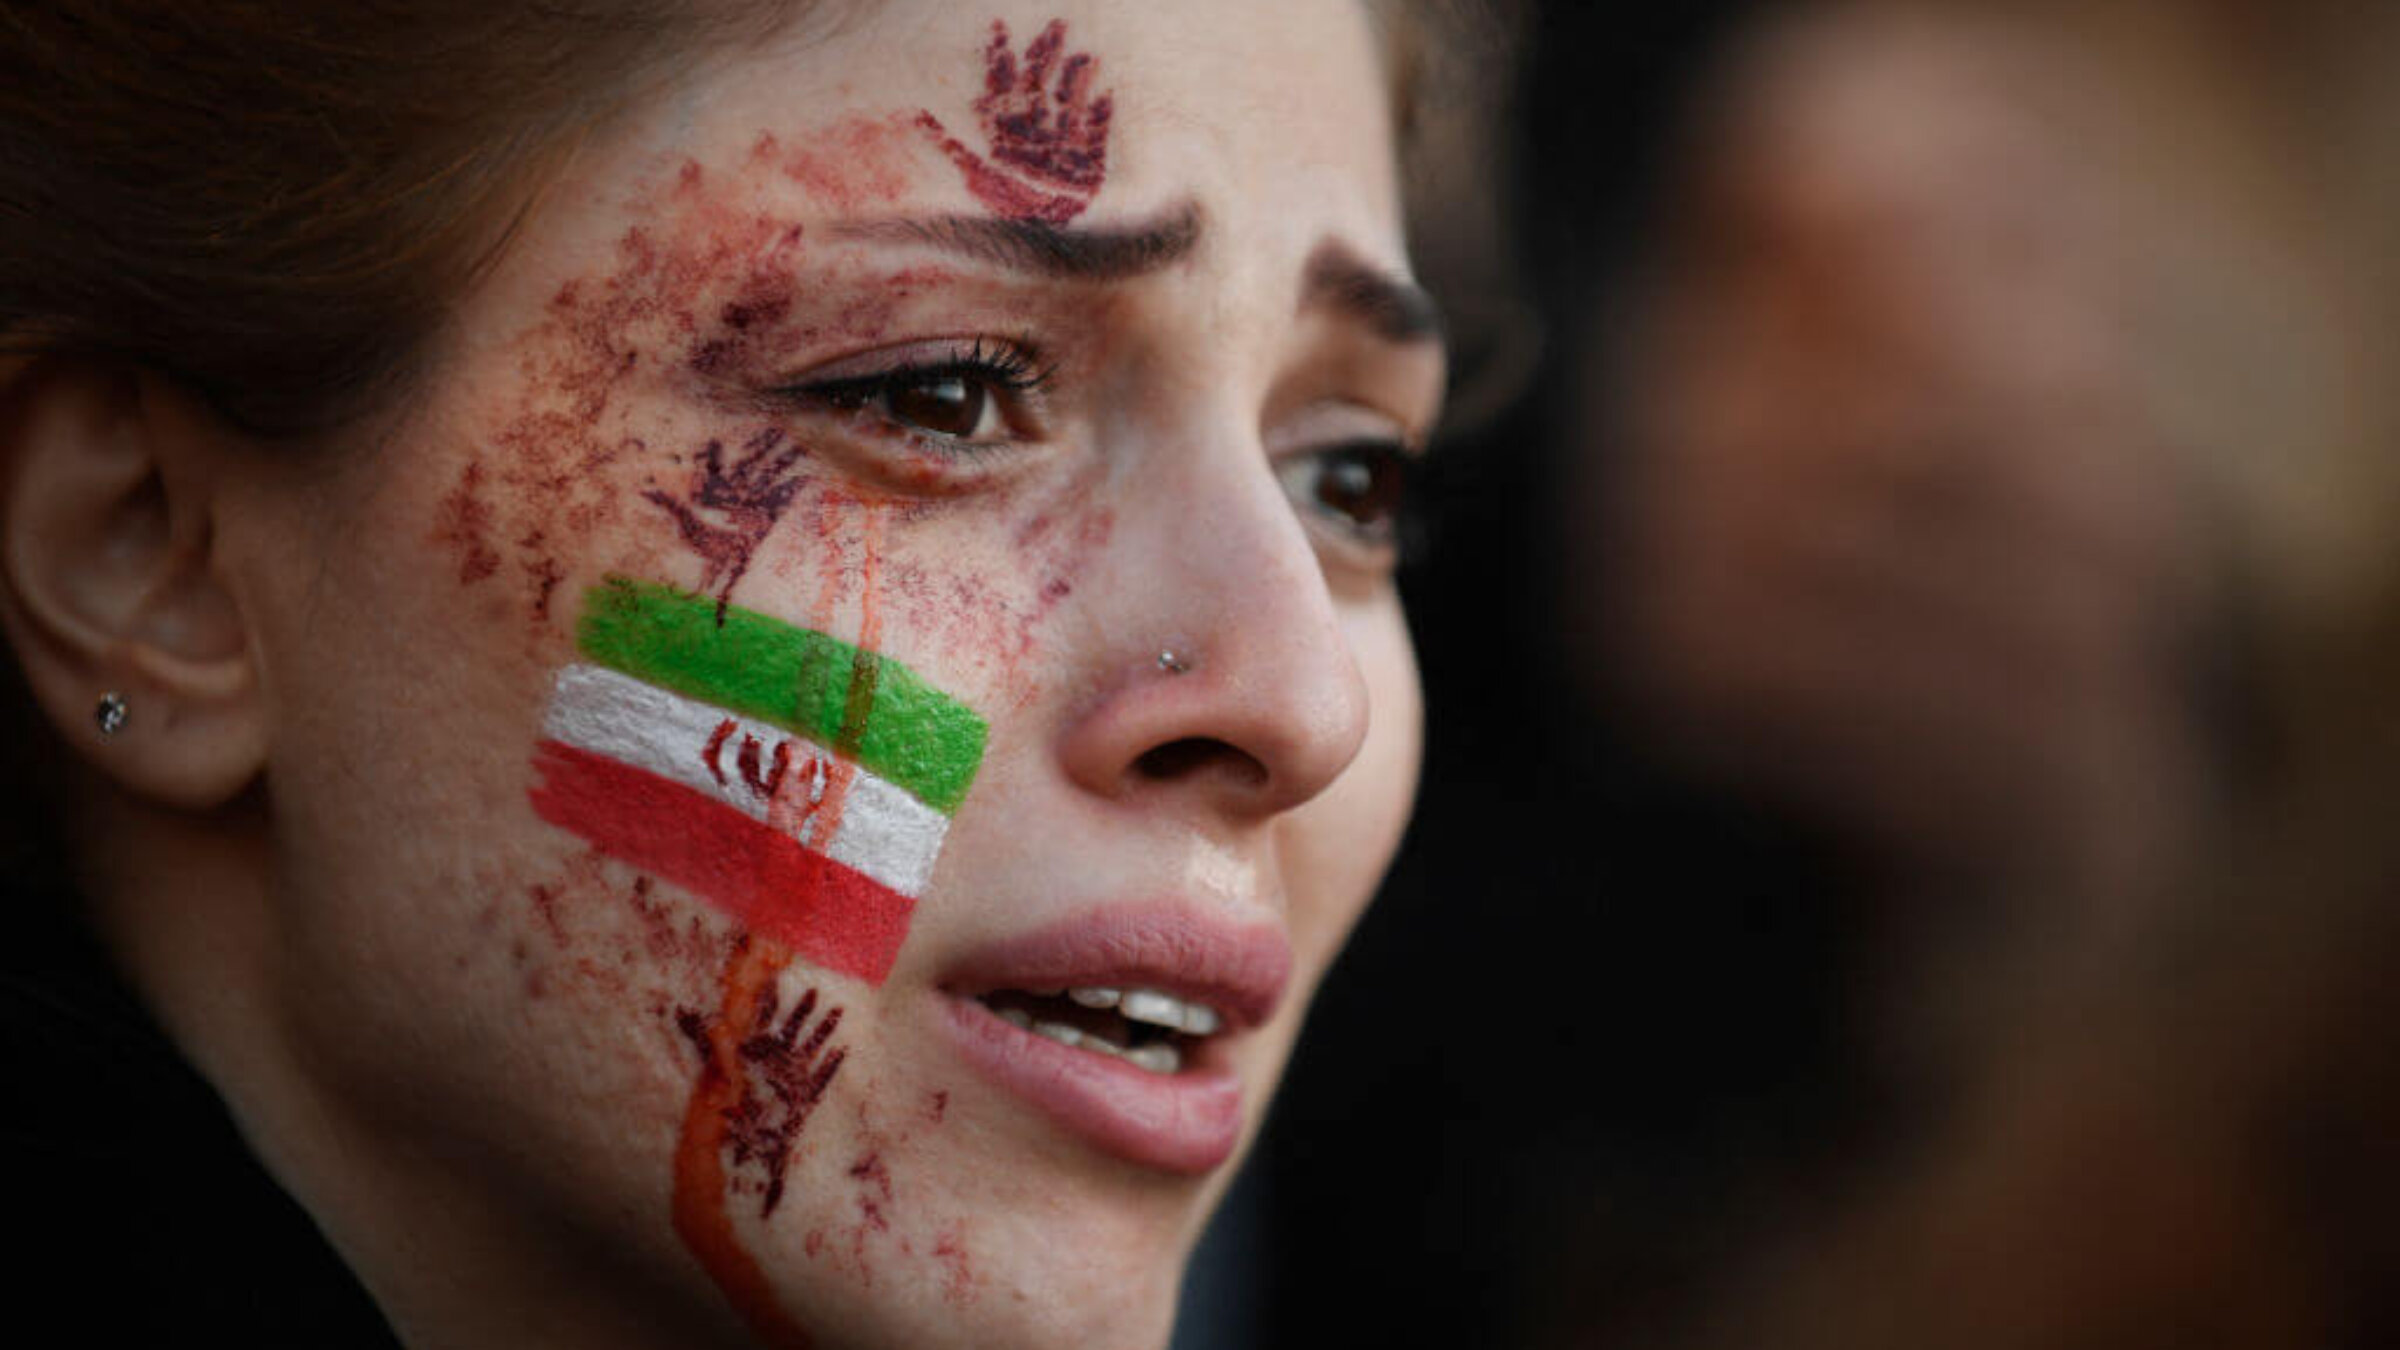 A demonstrator with an Iranian flag and red hands painted on her face attends a rally in support of Iranian protests in Paris on Oct. 9, 2022, following the death of Iranian woman Mahsa Amini.